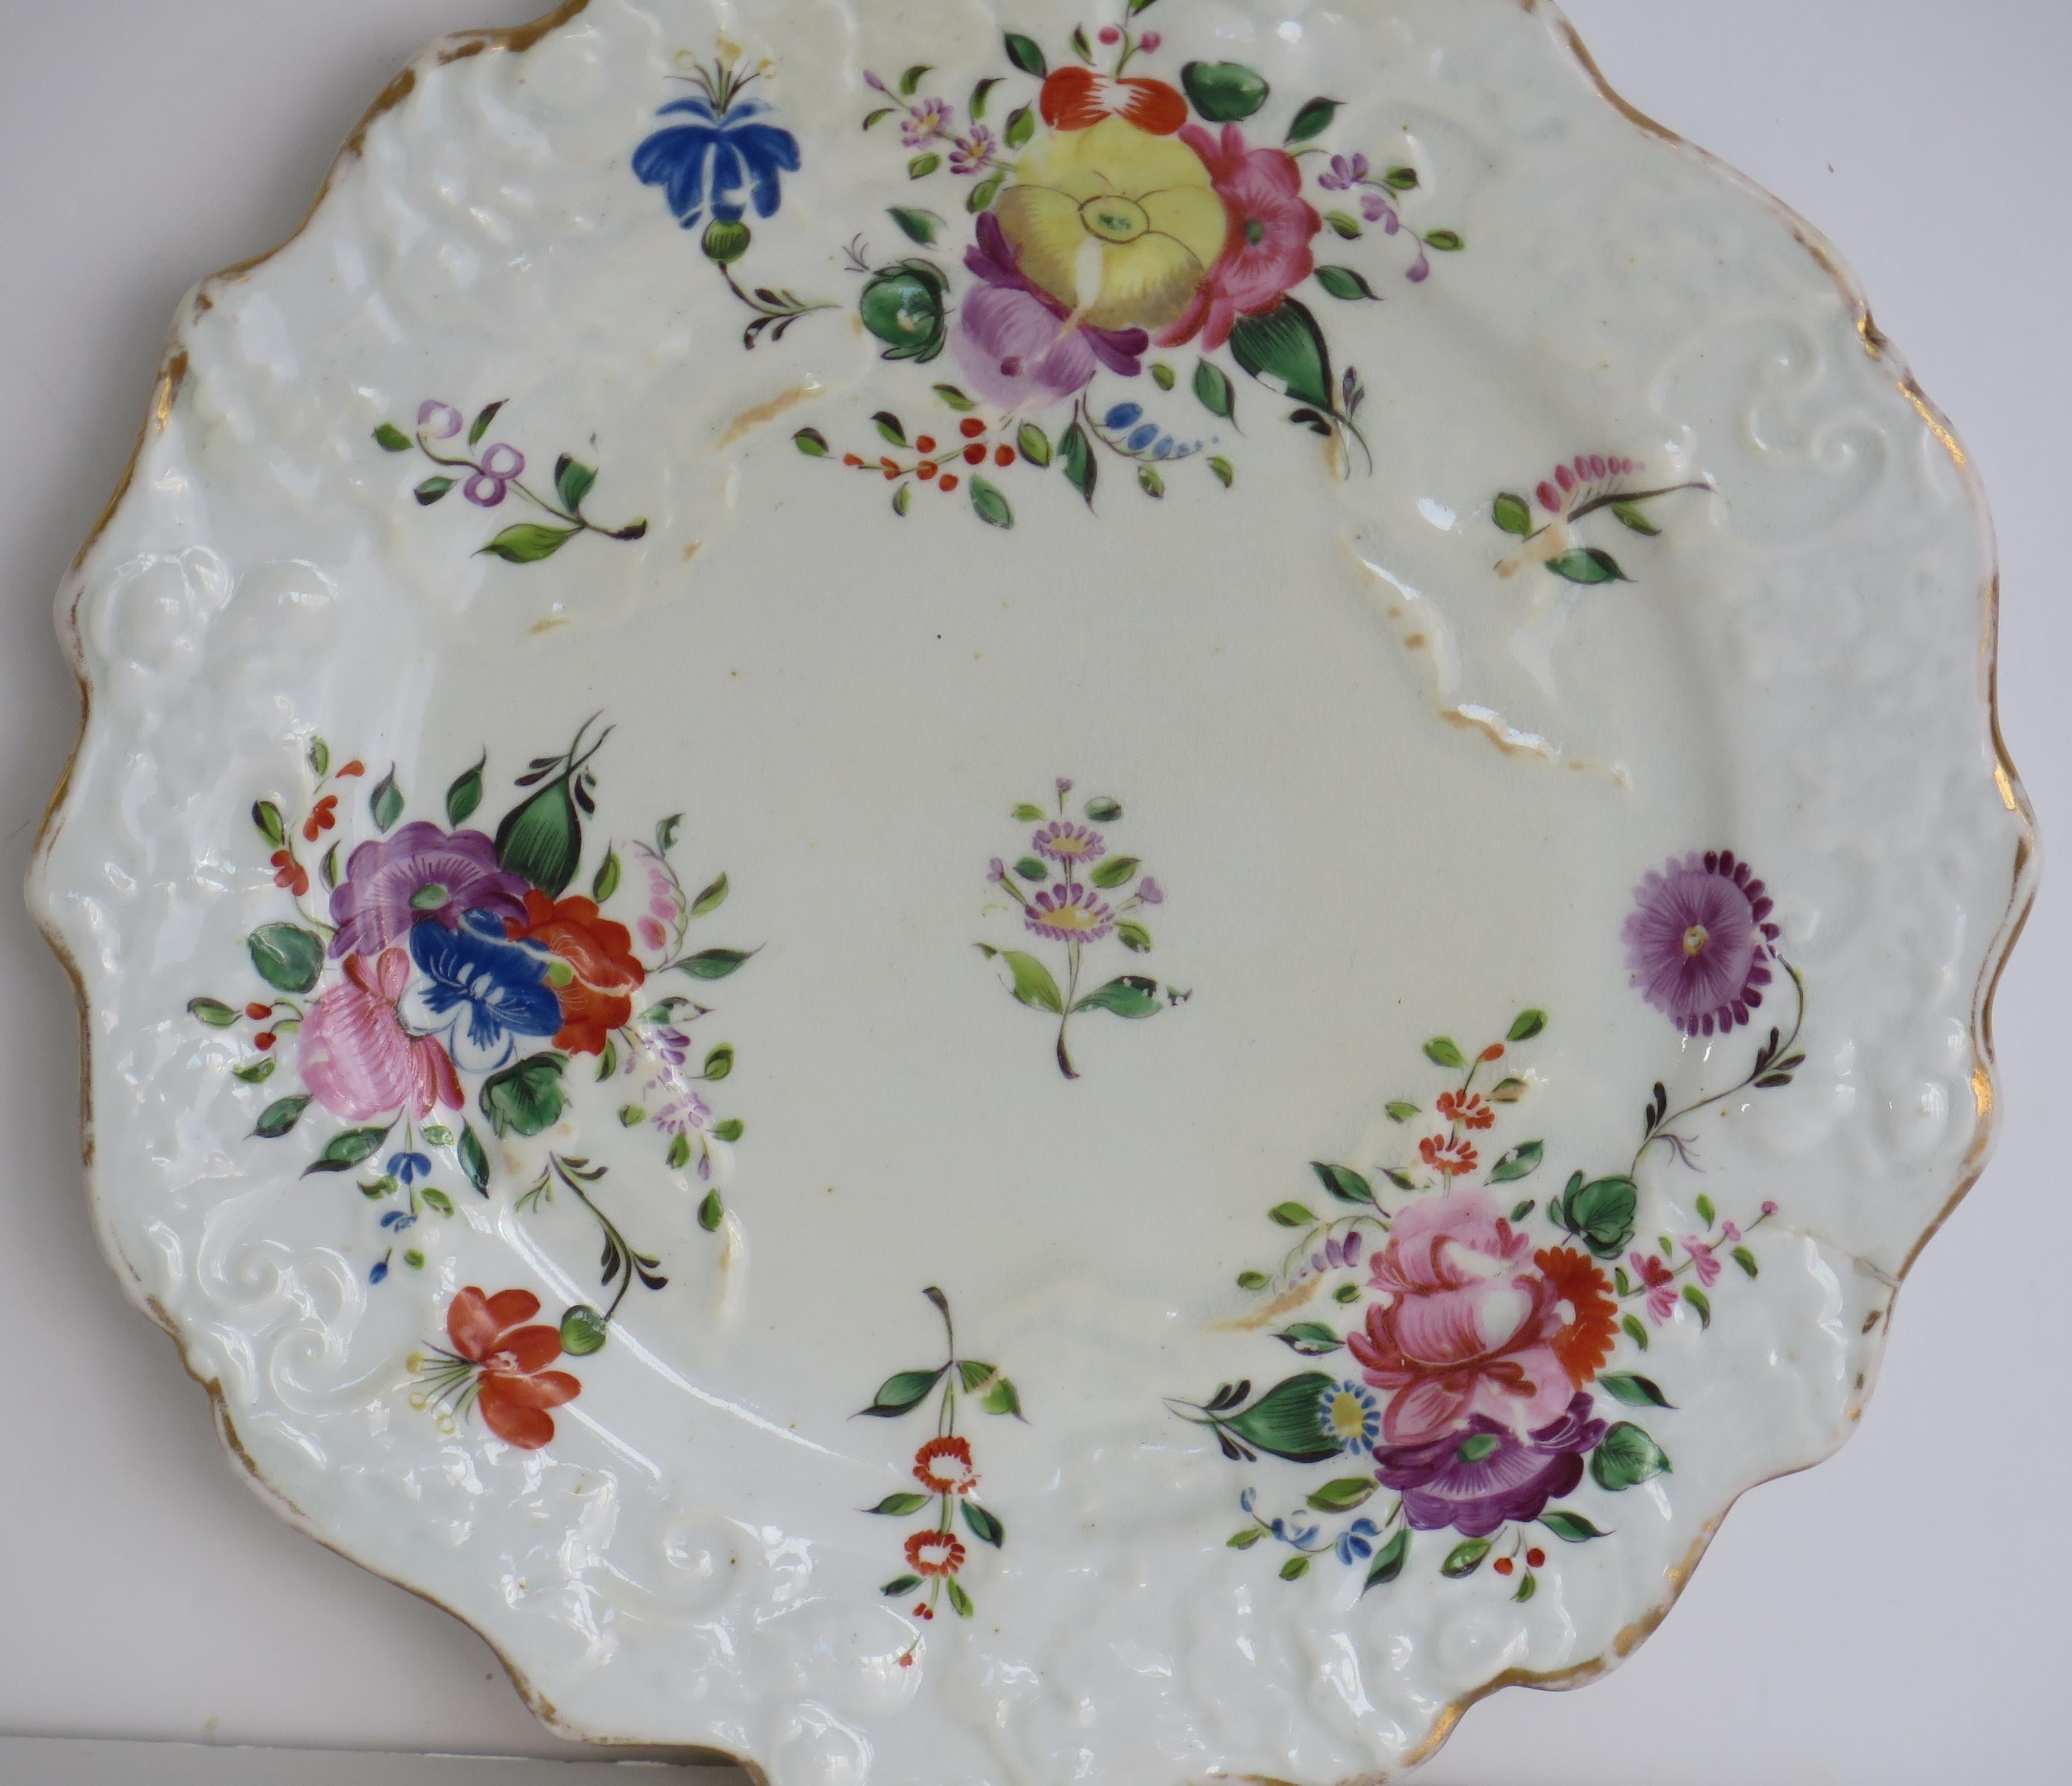 This is a Mason's bone china porcelain Desert Plate in a hand painted pattern called; Central Spray Mixed Border. 

The plate has a 